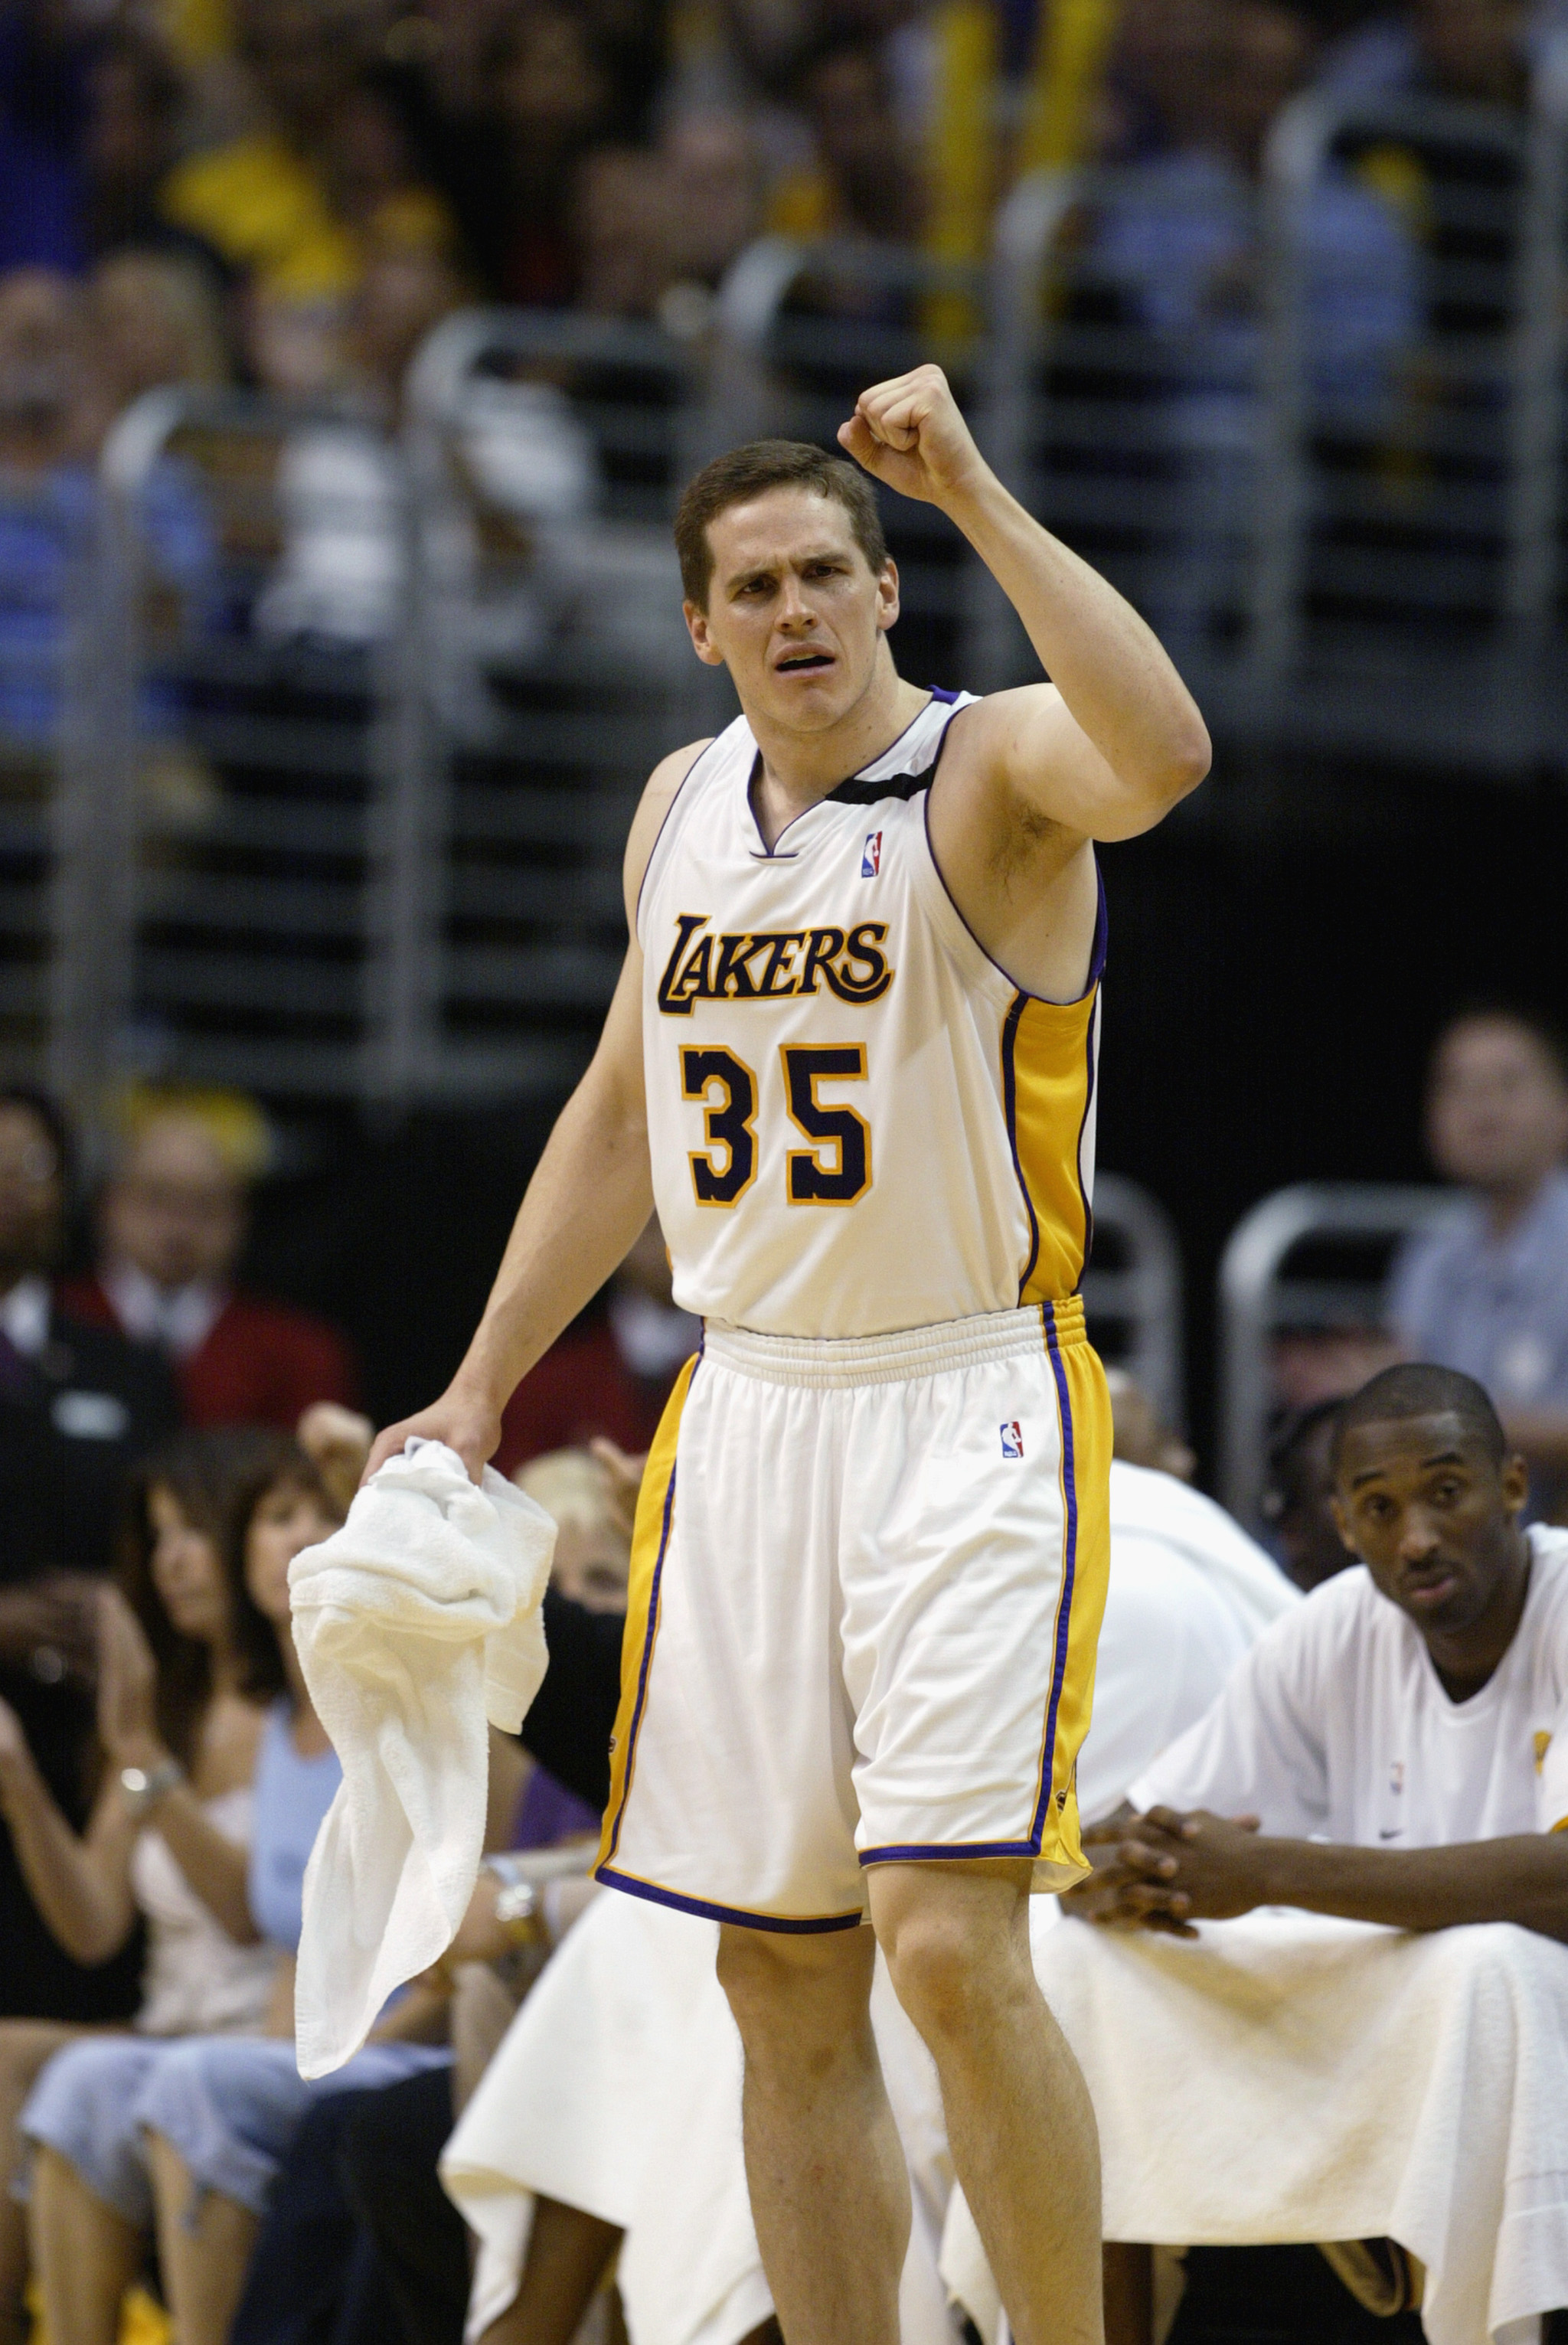 LOS ANGELES - MAY 11:  Mark Madsen #35 of the Los Angeles Lakers celebrates against the San Antonio Spurs in Game four of the Western Conference Semifinals during the 2003 NBA Playoffs on May 11, 2003 at Staples Center in Los Angeles, California.  The Lak